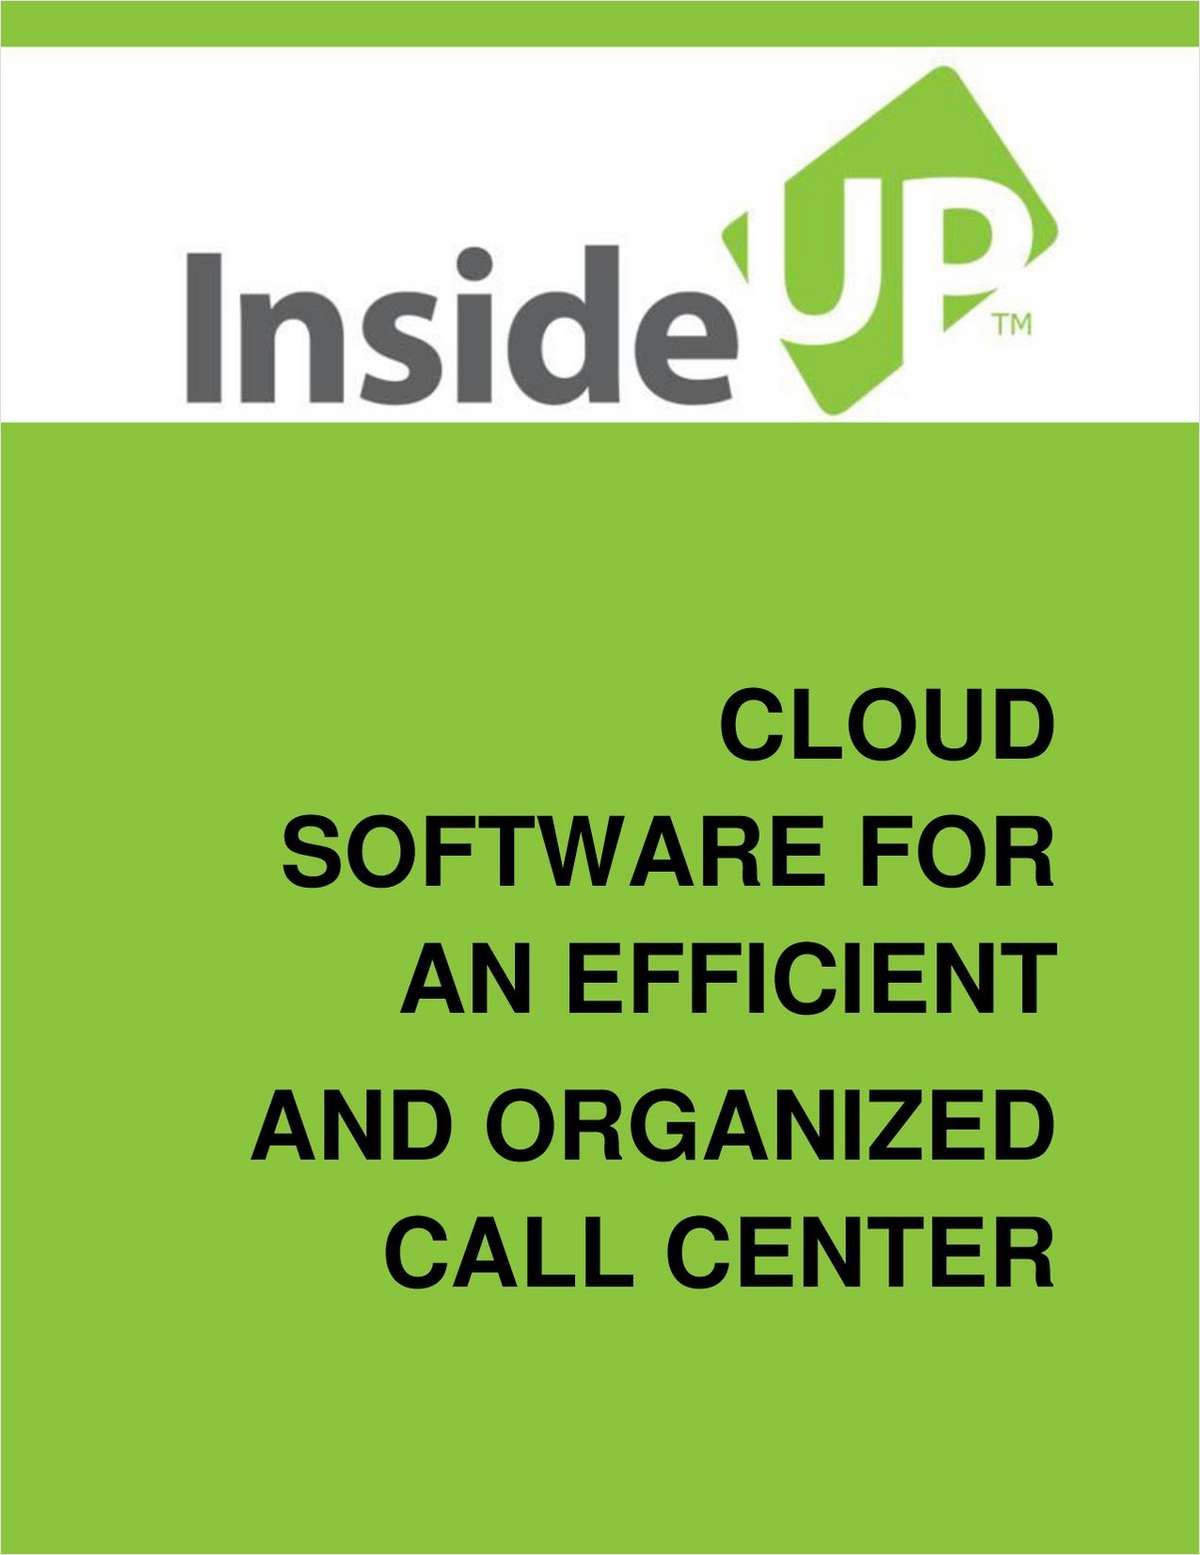 Cloud Software For An Efficient and Organized Call Center